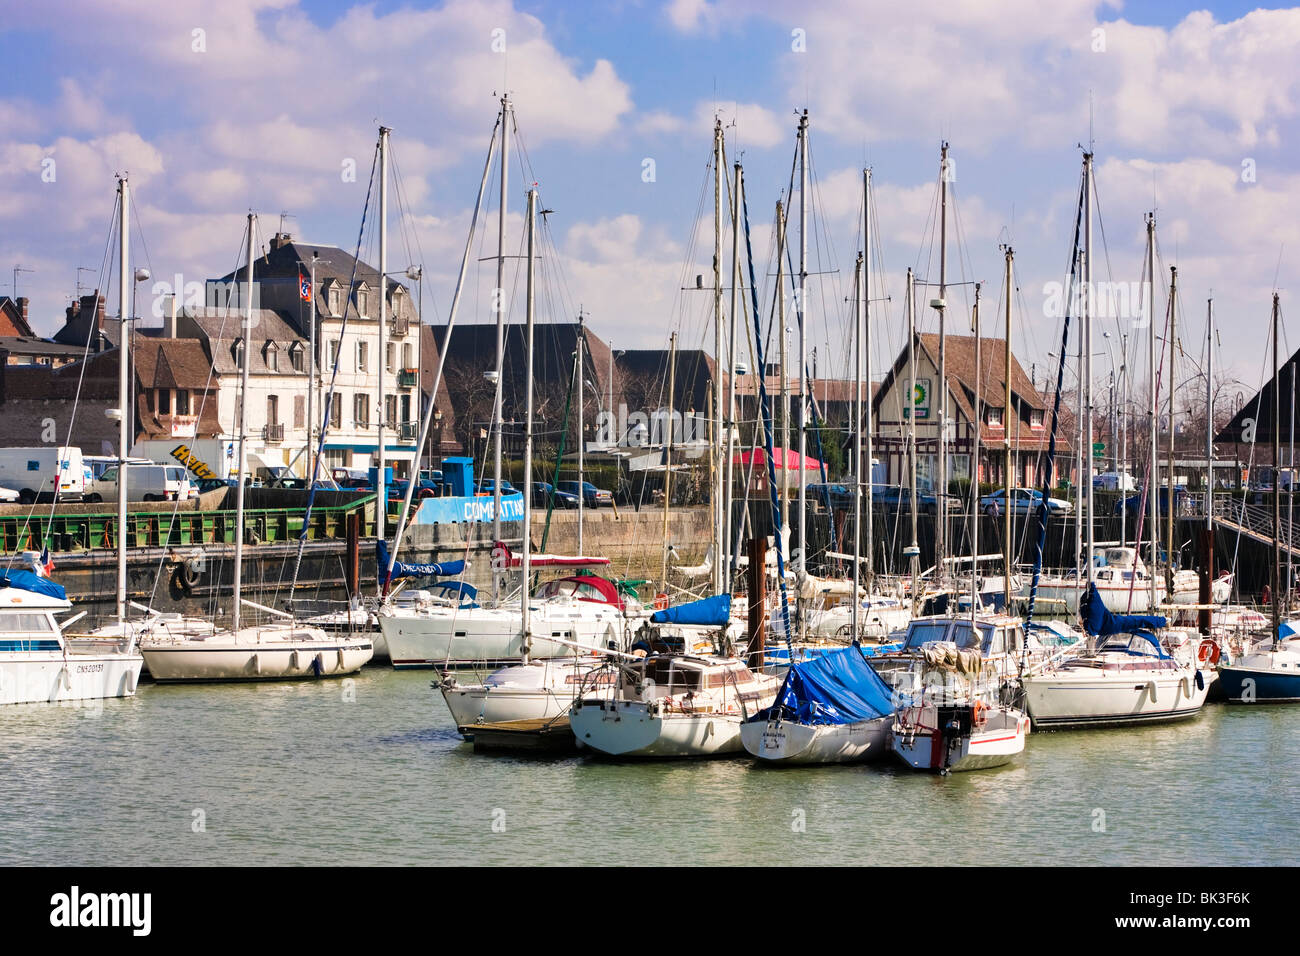 Yachts and boats in the Bassin Morny, Deauville, Normandy, France Stock Photo